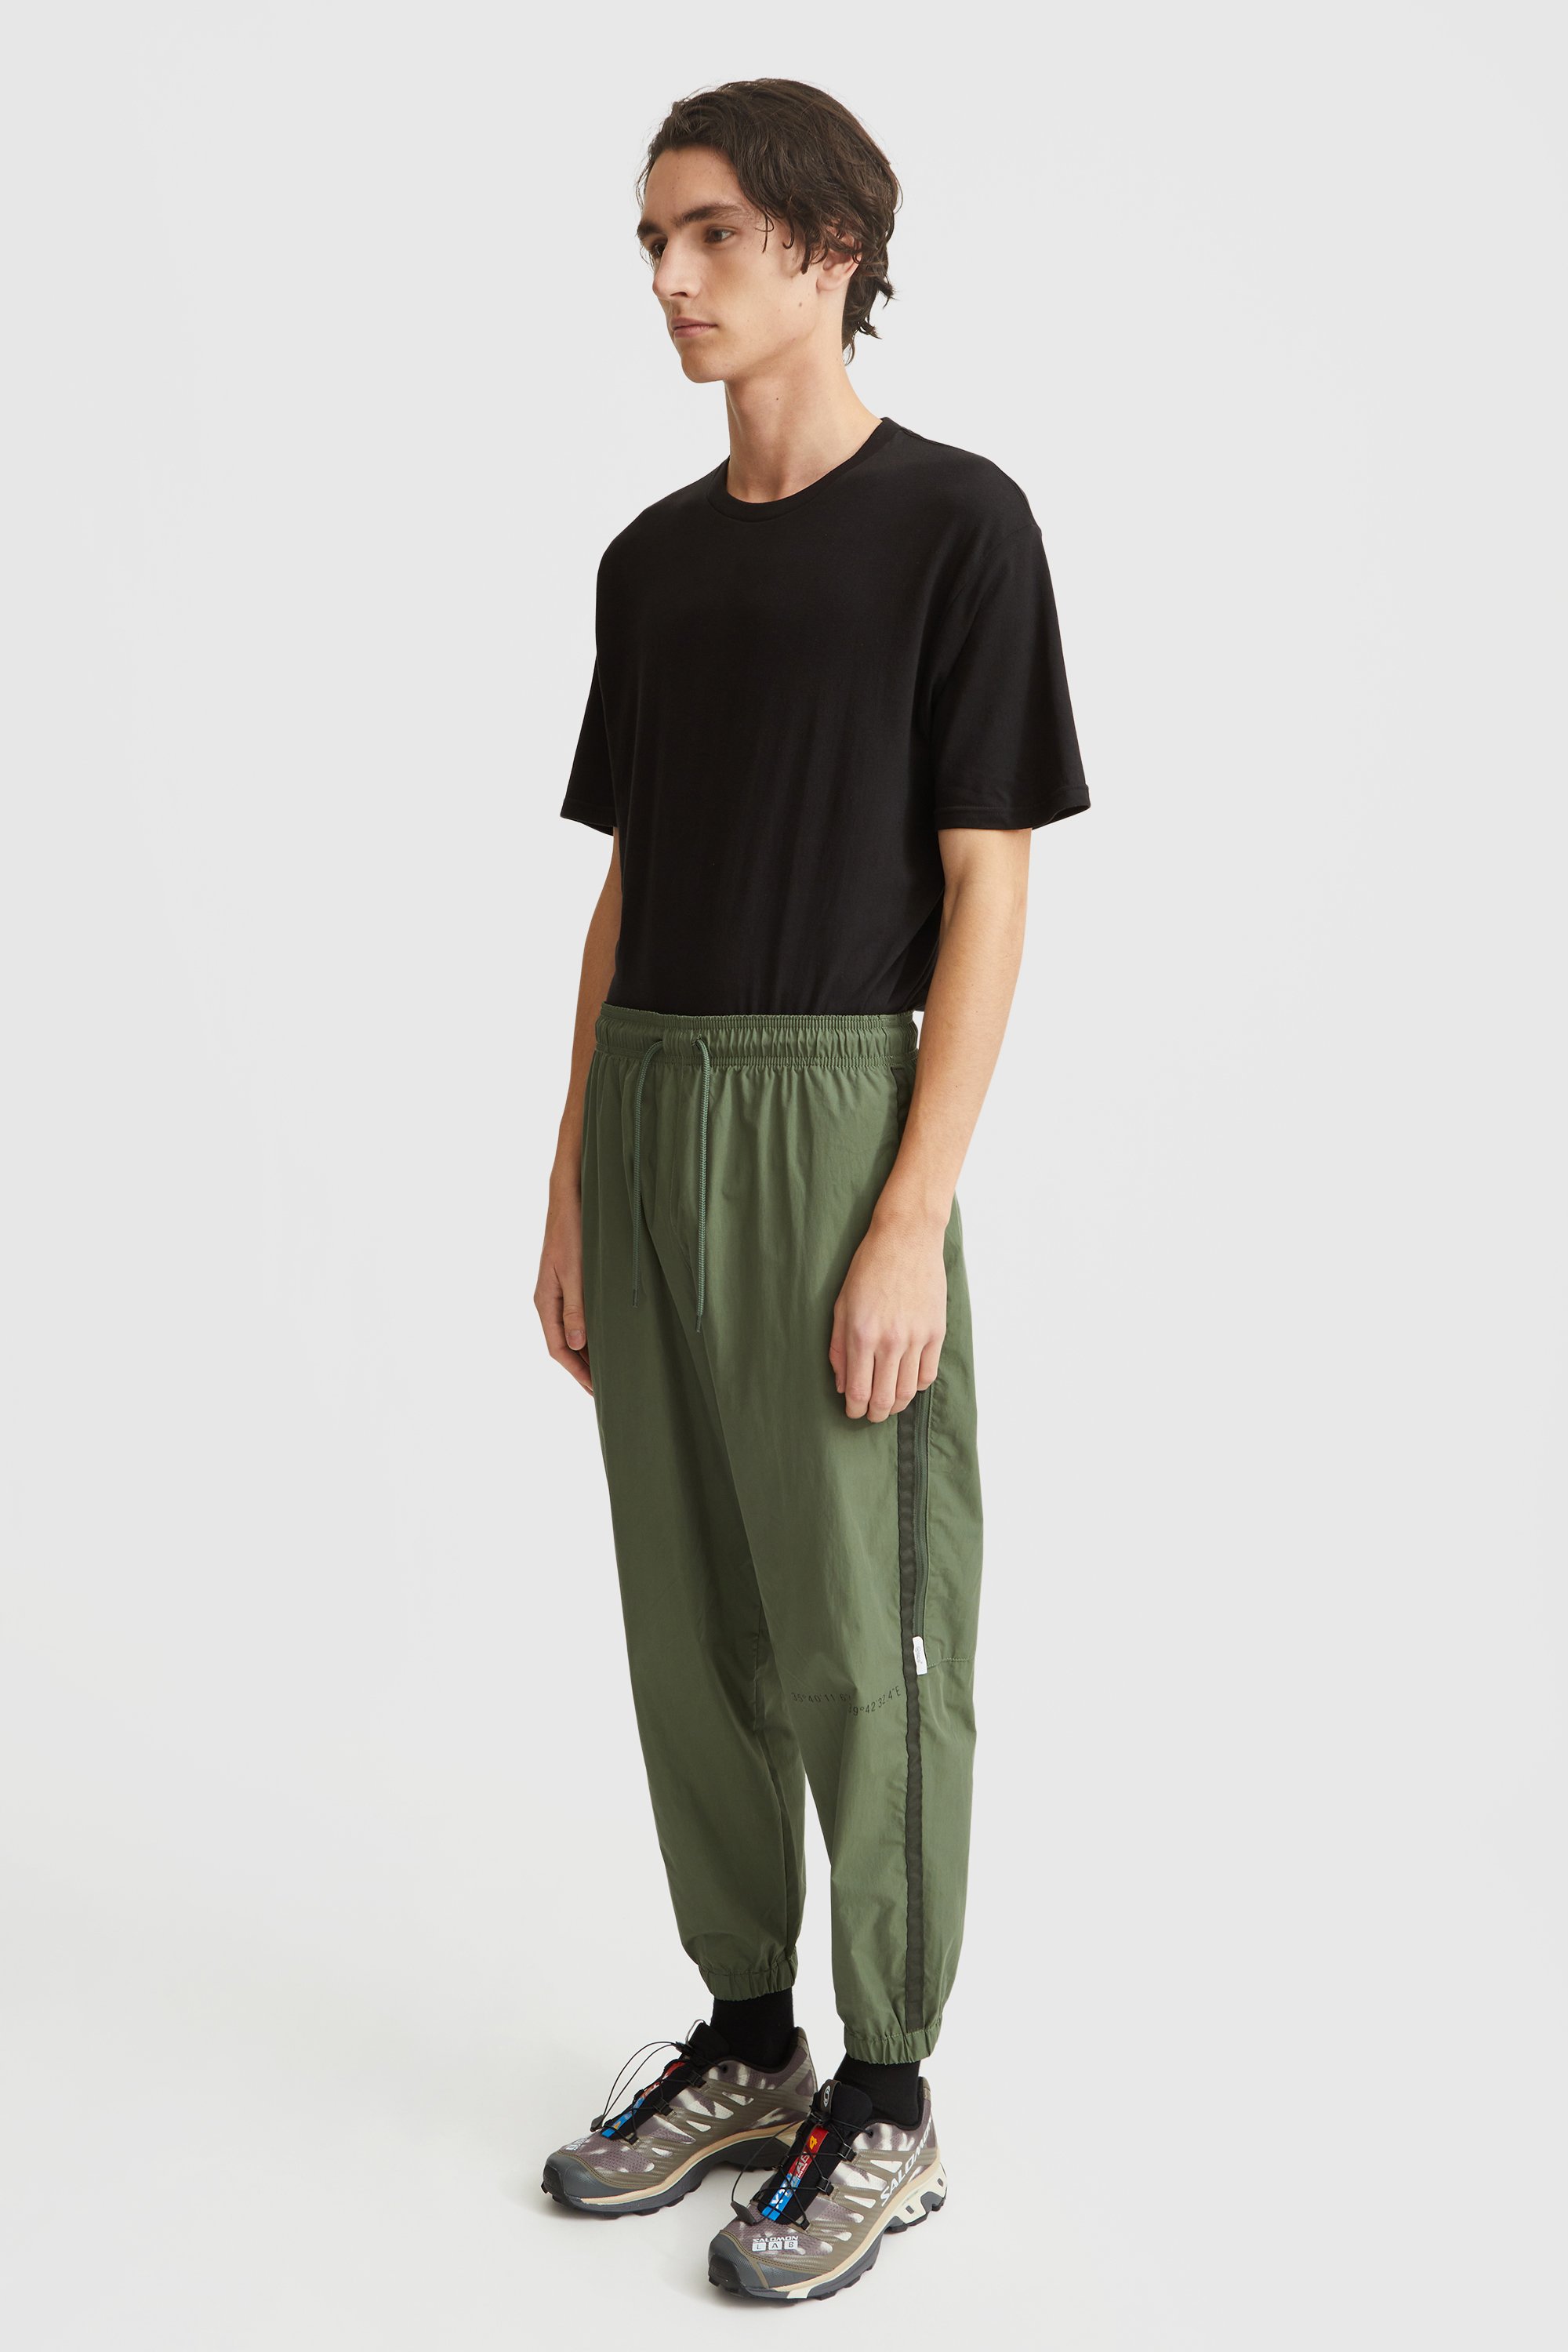 WTAPS Incom/Trousers / Nyco. Weather Olive drab | WoodWood.com